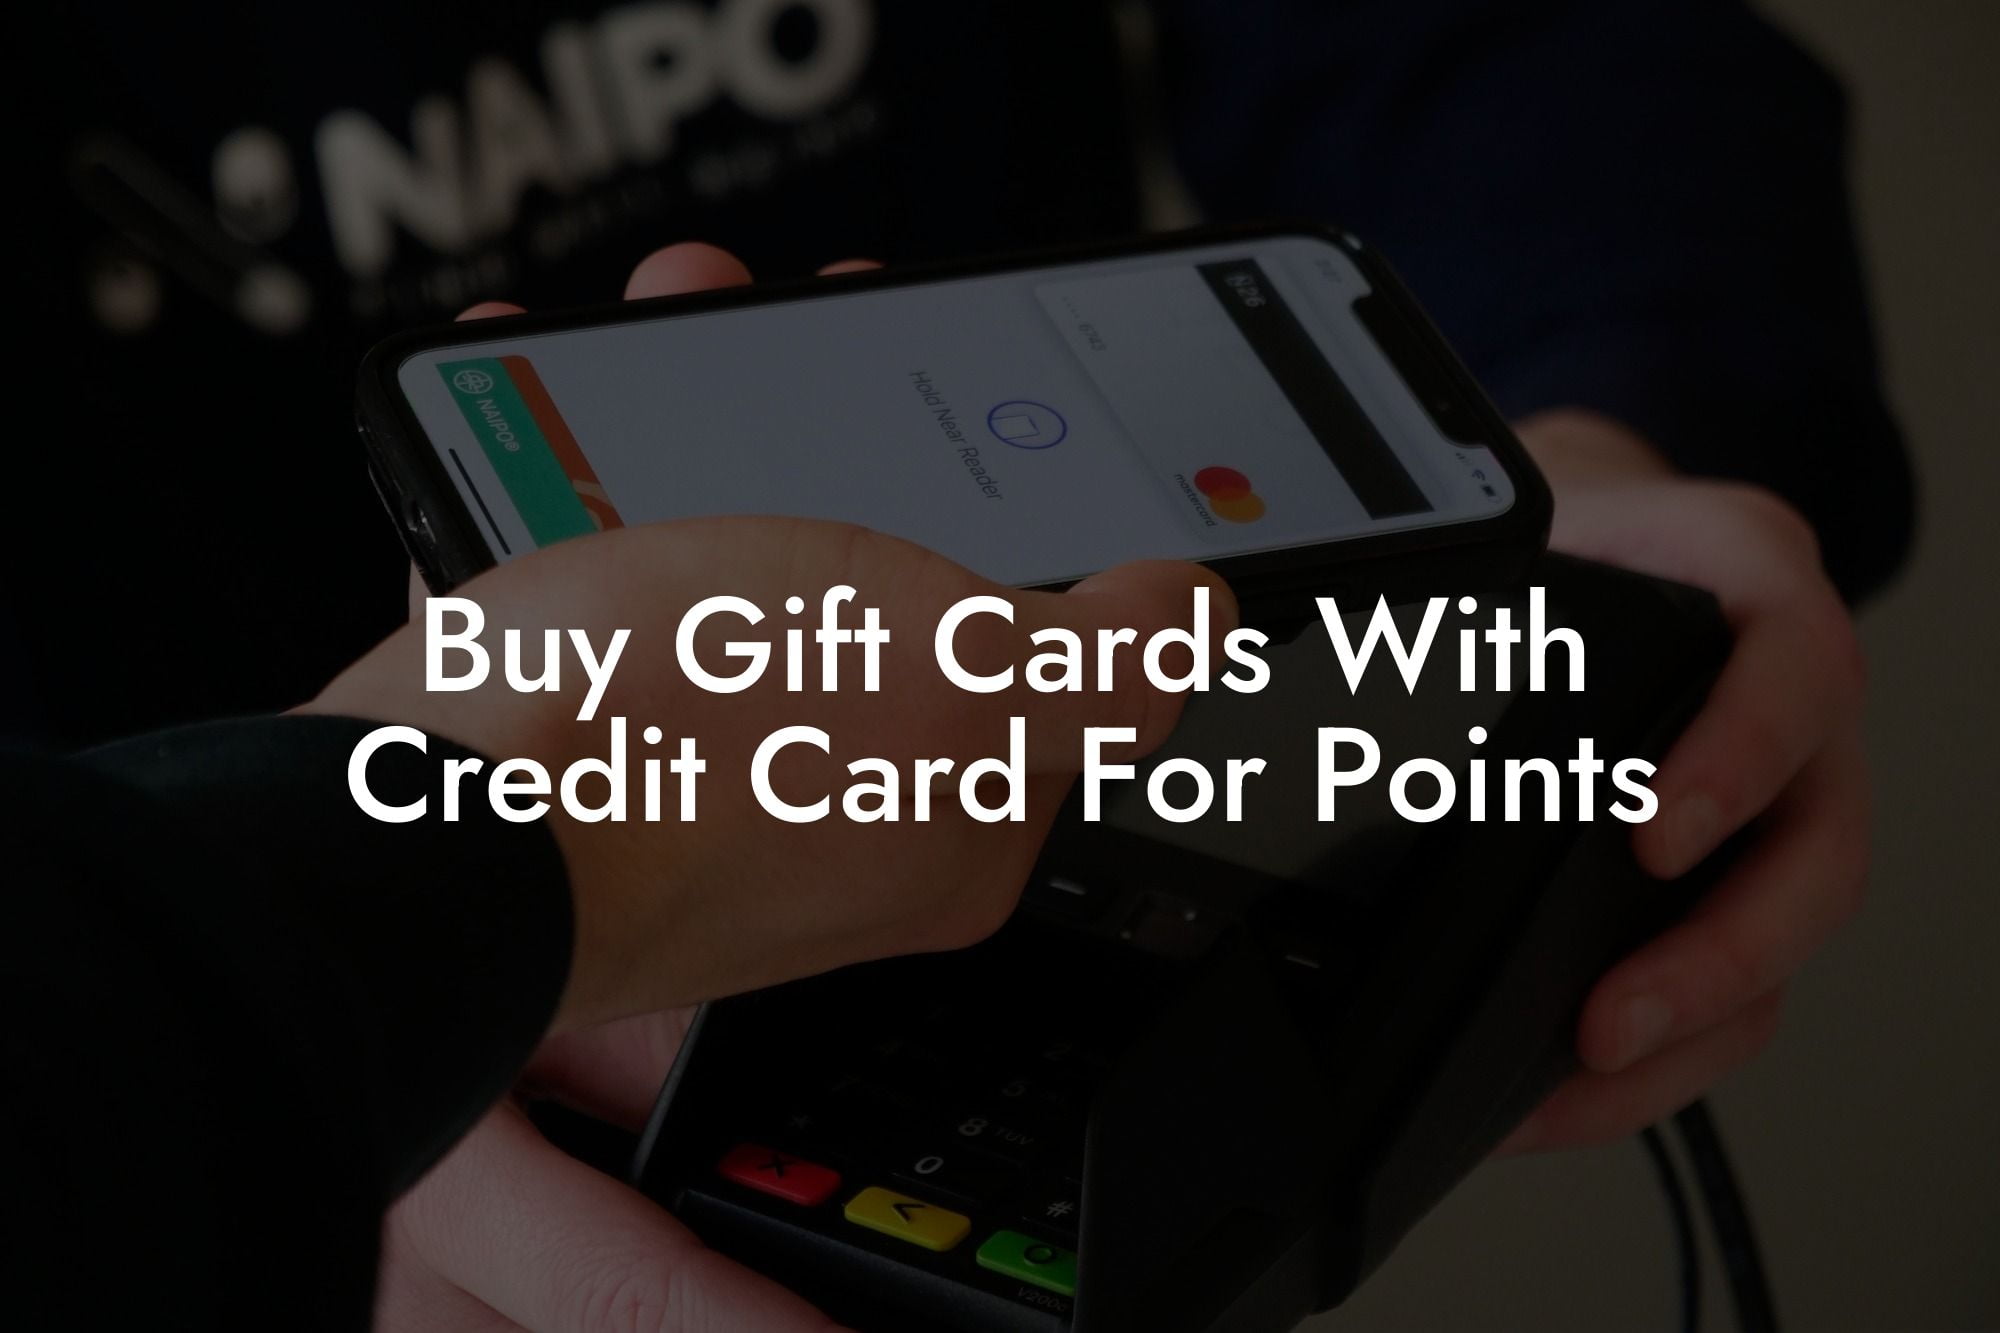 Buy Gift Cards With Credit Card For Points